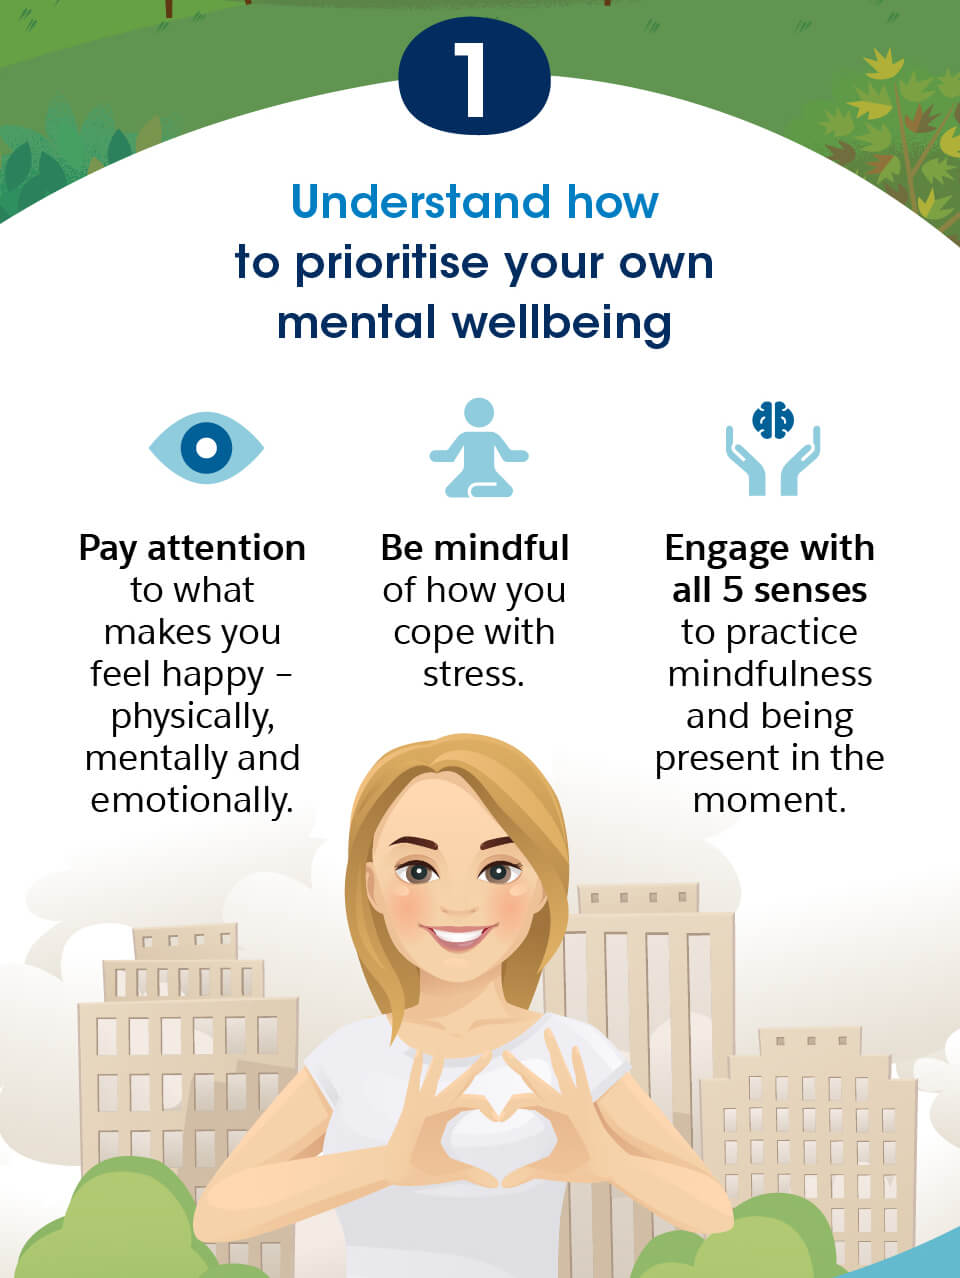 Understand how to prioritise your own mental wellbeing